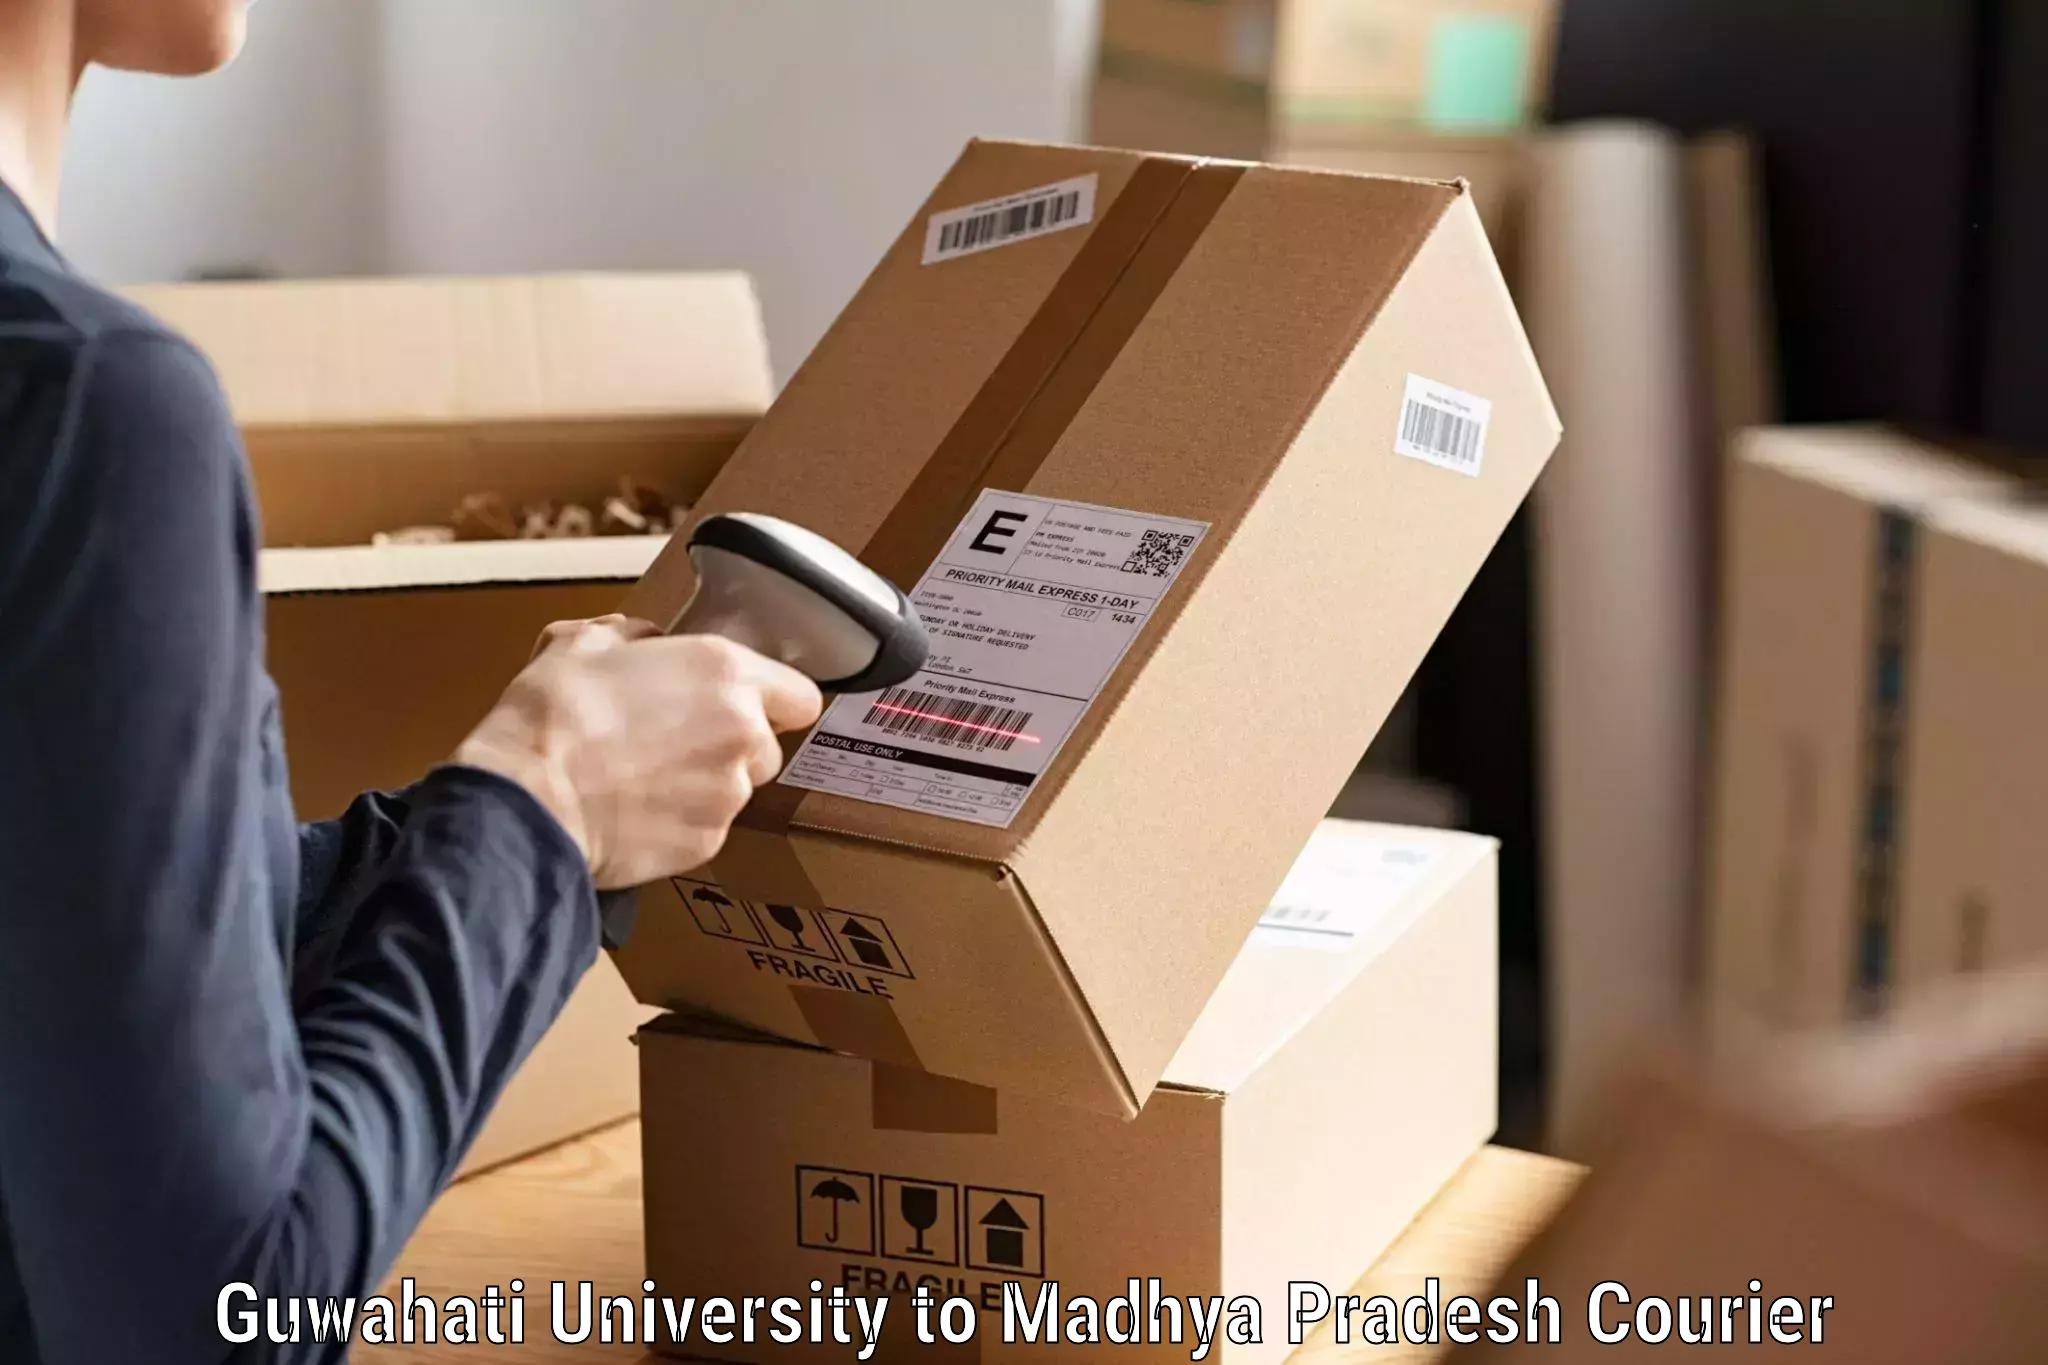 Overnight delivery services Guwahati University to Rajendragram